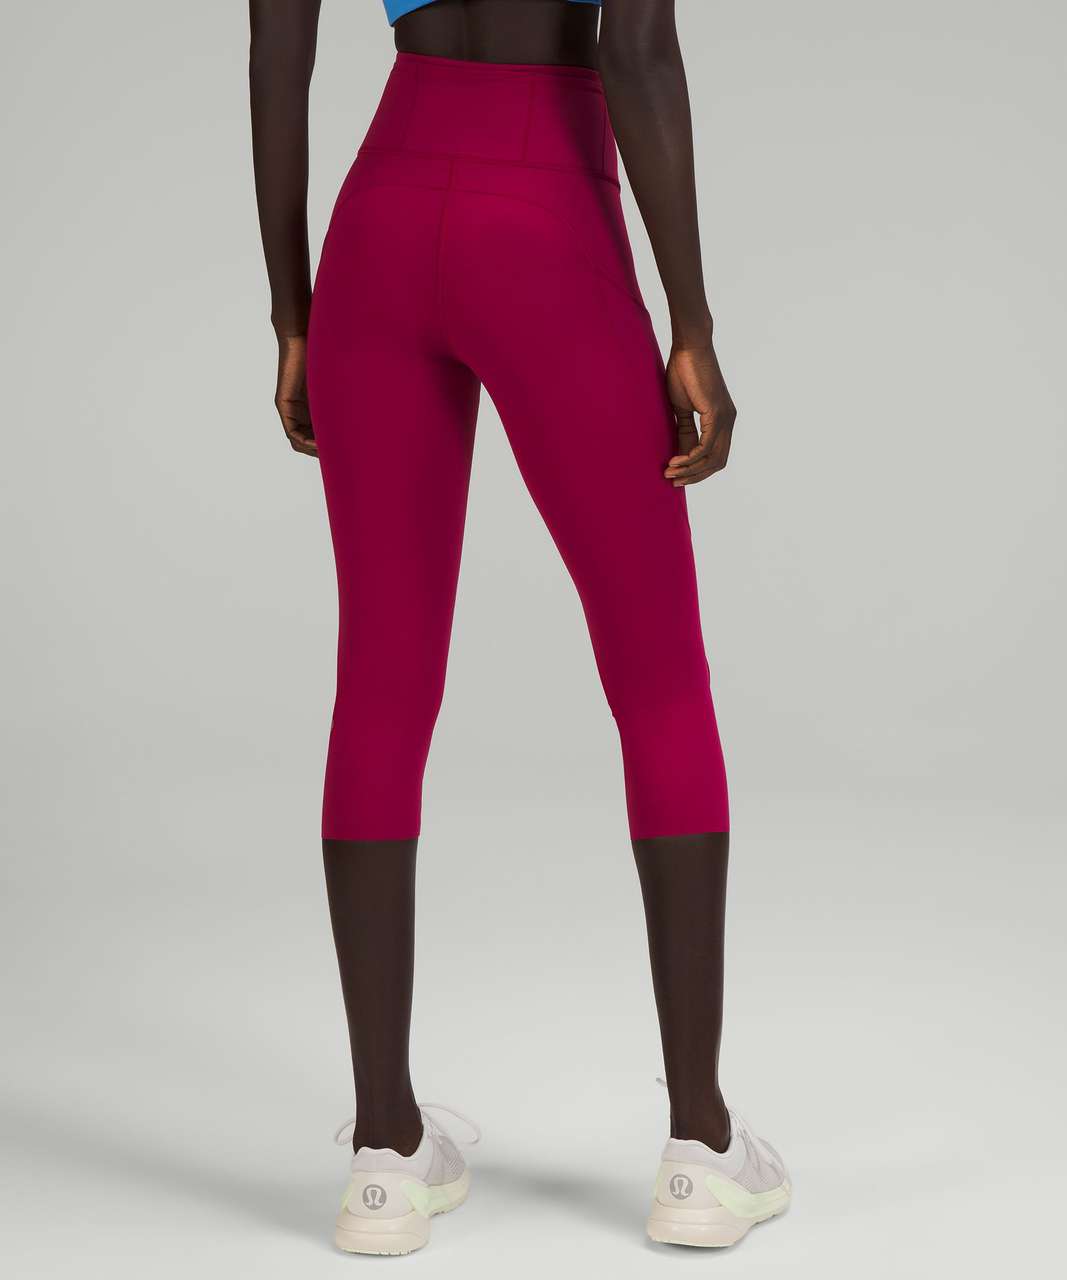 Lululemon Fast and Free High-Rise Crop 19" - Pomegranate